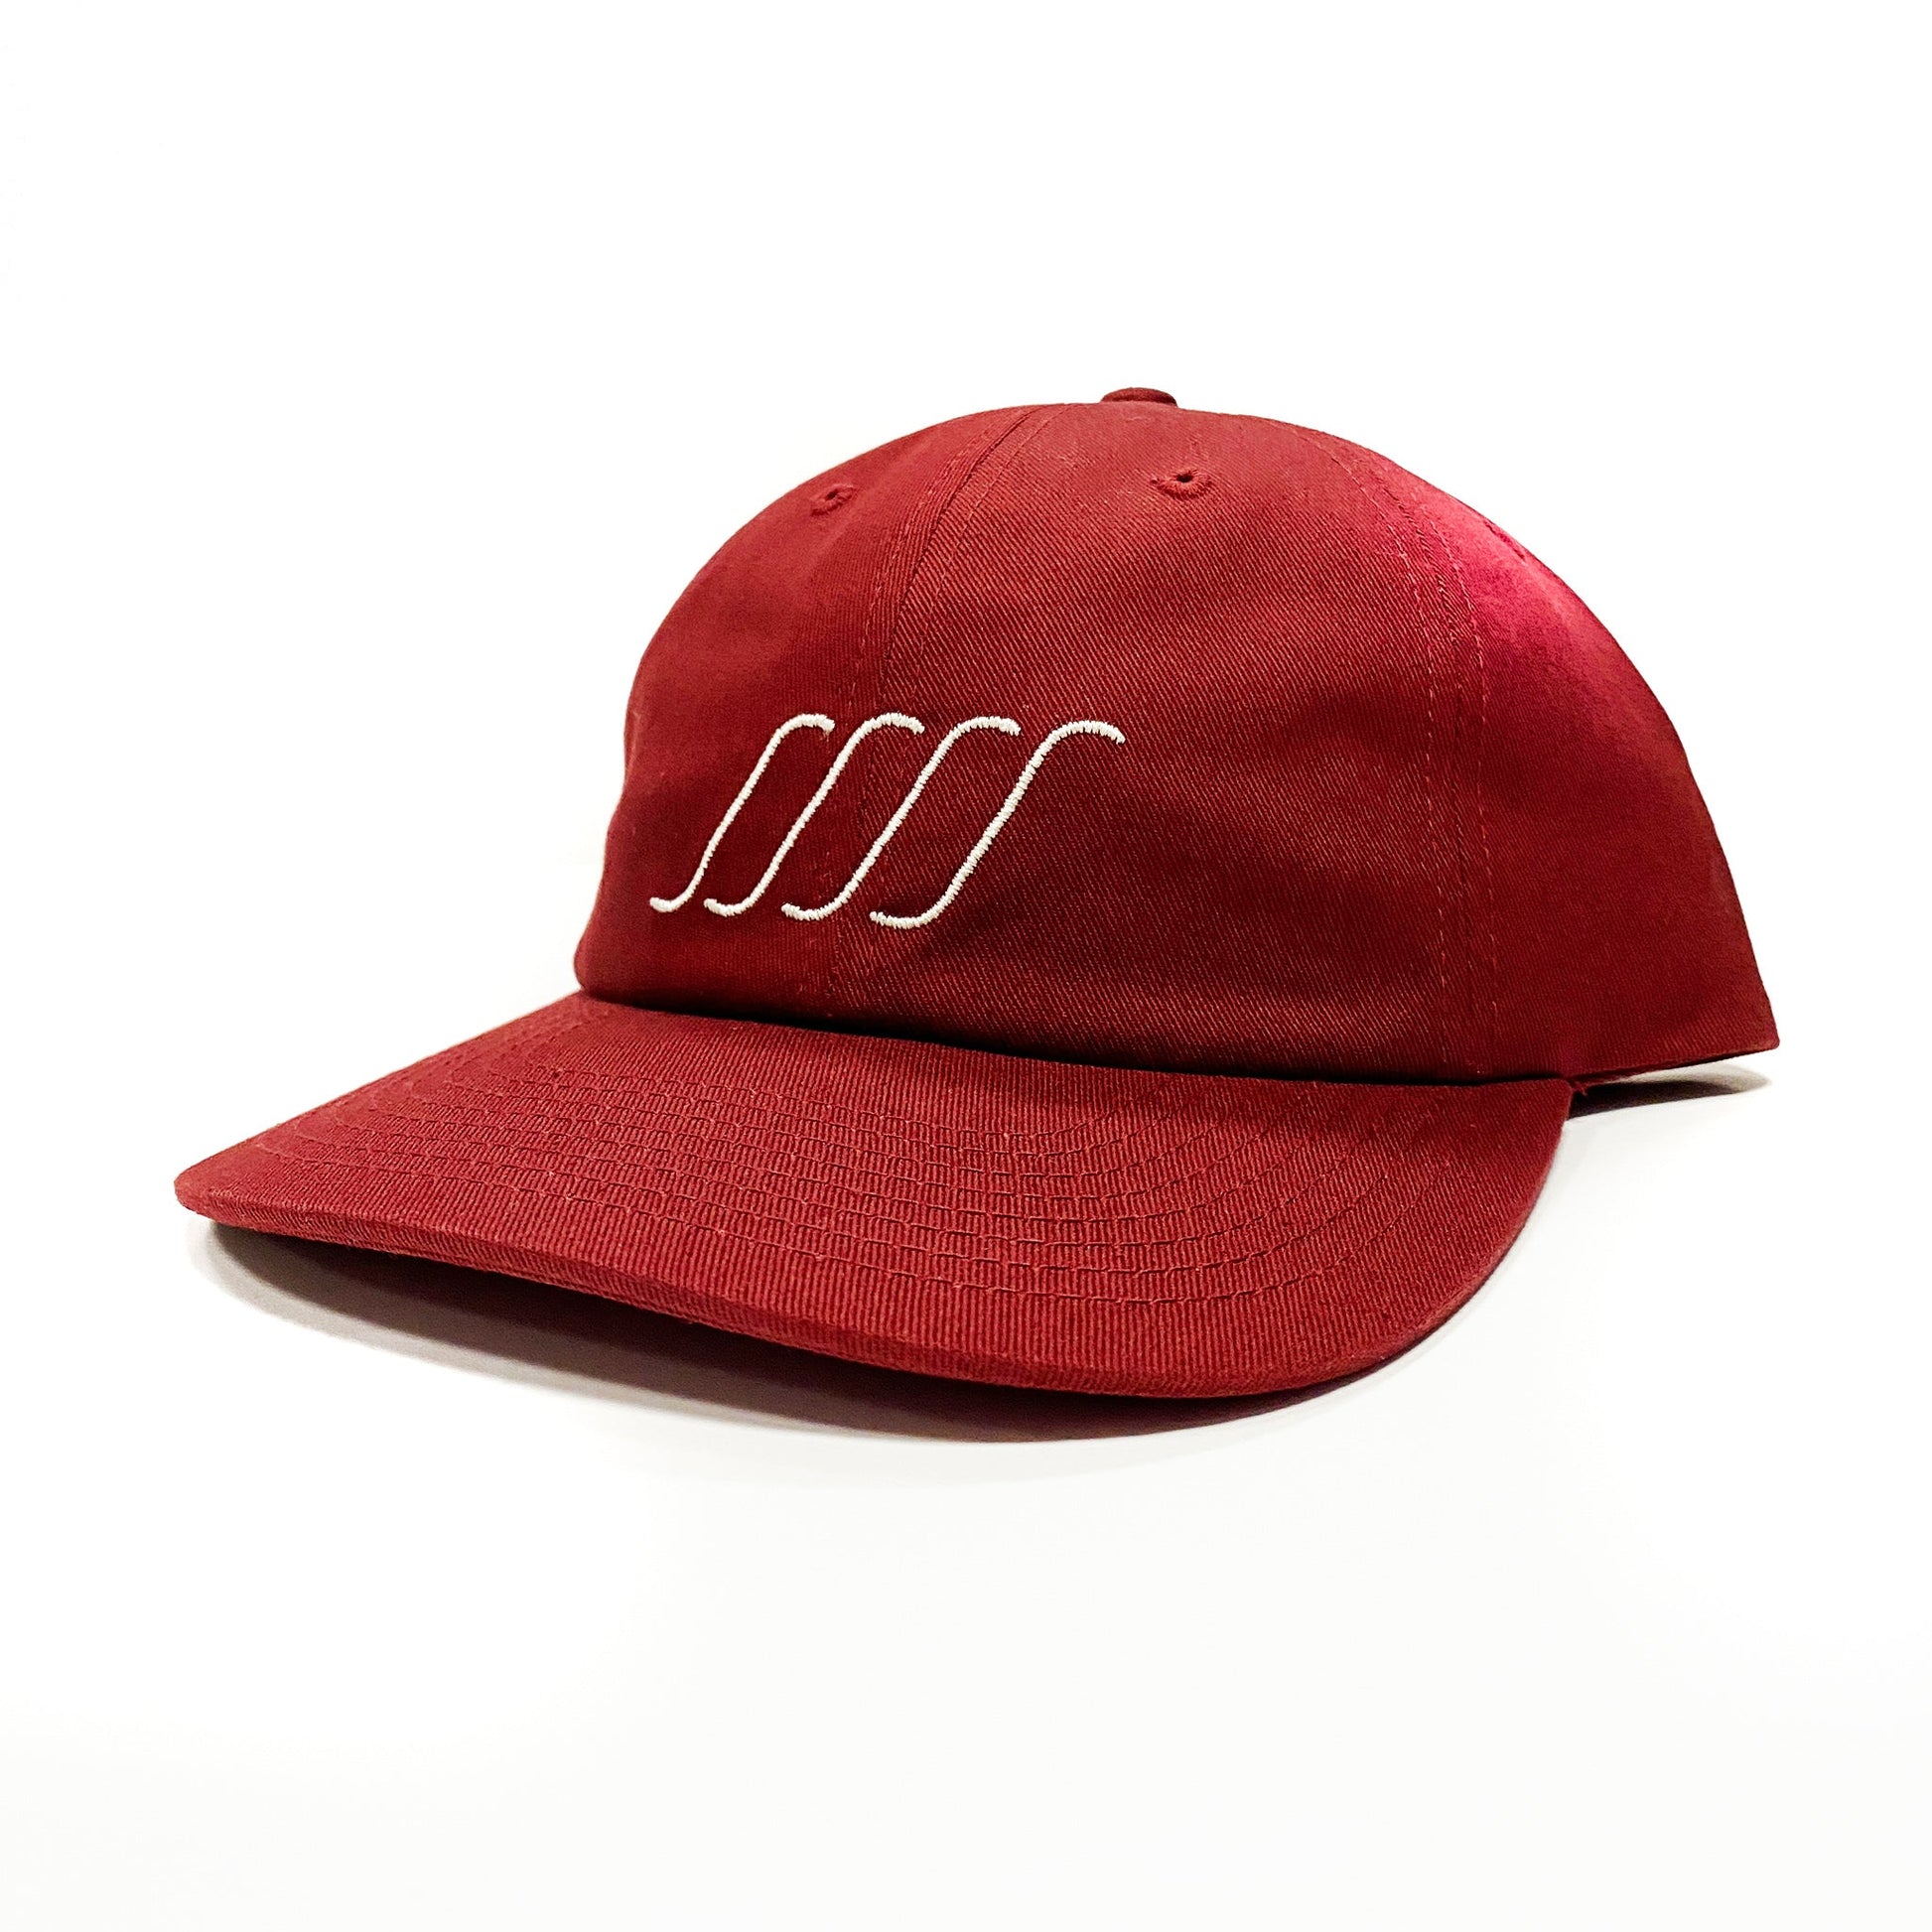 South Swell Embroidered Hat Default SOUTH SWELL Maroon 